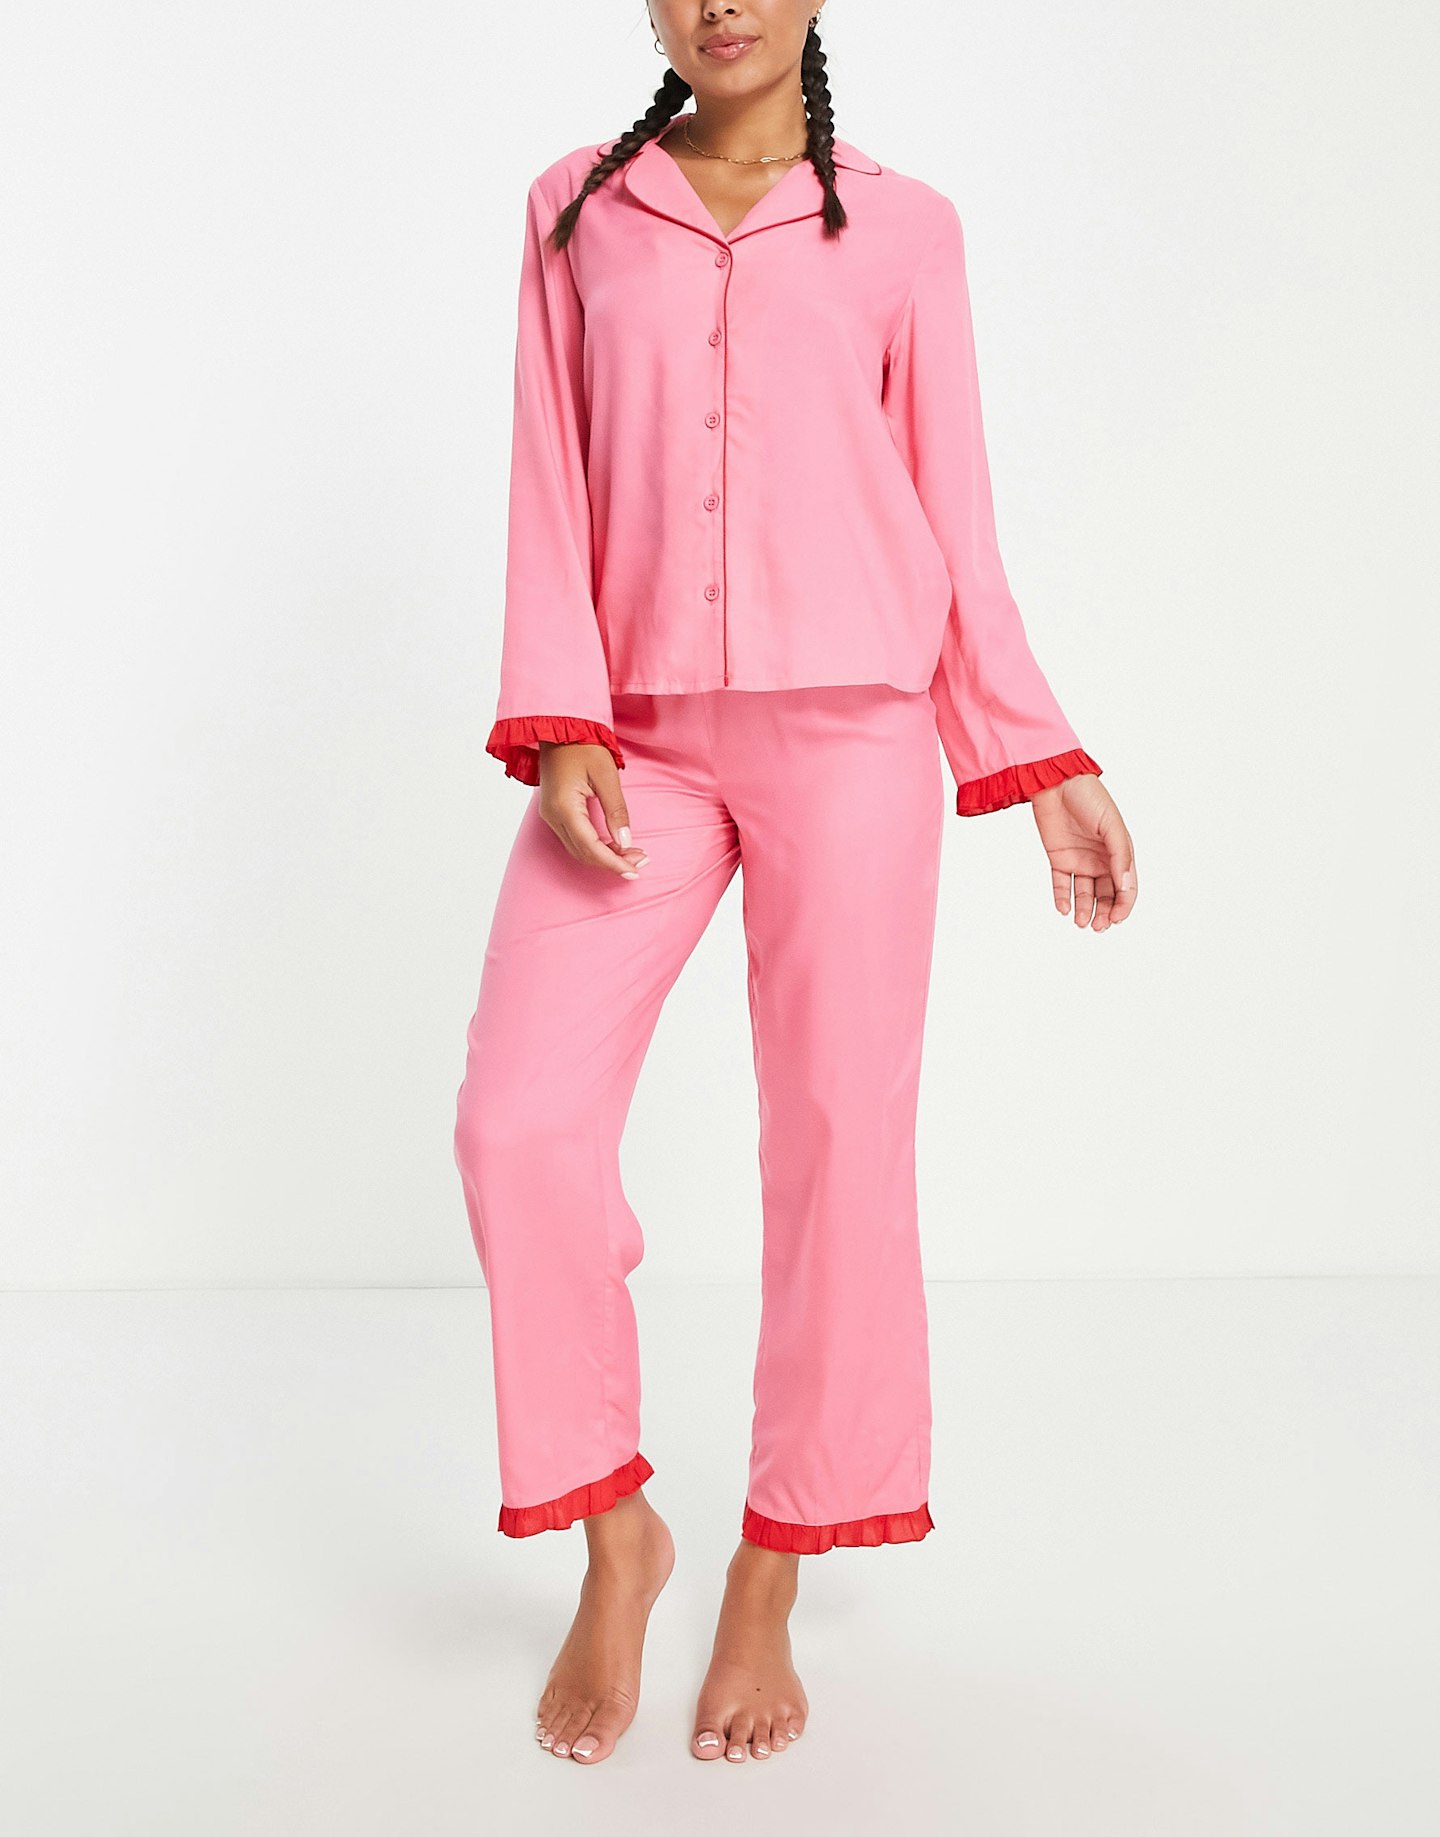 ASOS DESIGN Mix & Match Modal Pyjama Set with Contrast Frill in Pink & Red